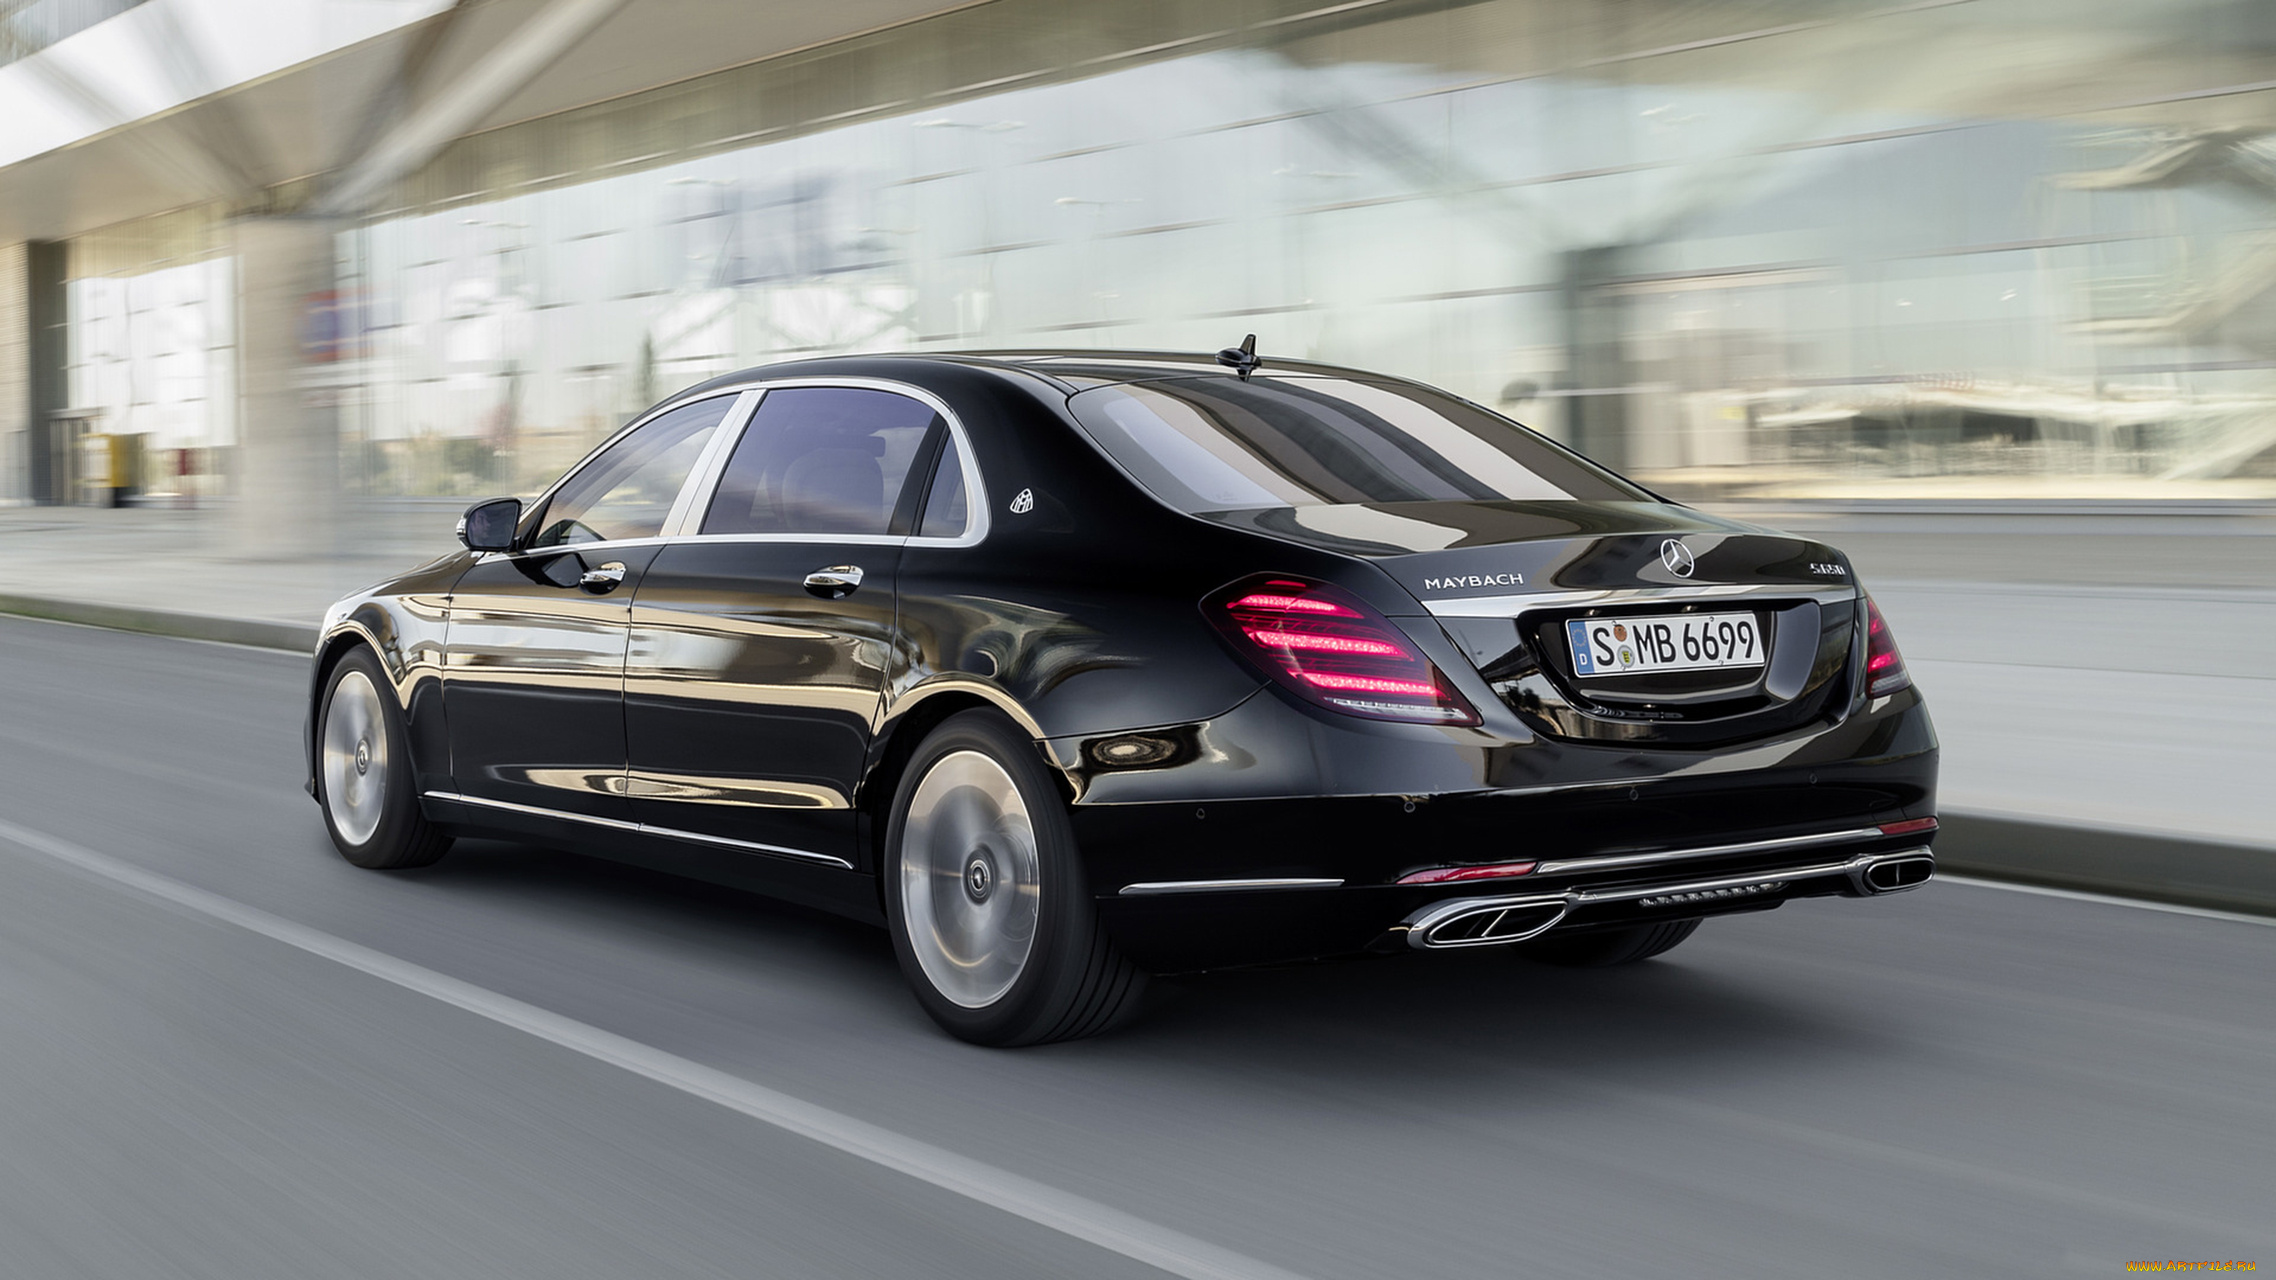 mercedes-maybach, s650, s-class, black, 2018, автомобили, mercedes-benz, 2018, black, s-class, mercedes-maybach, s650